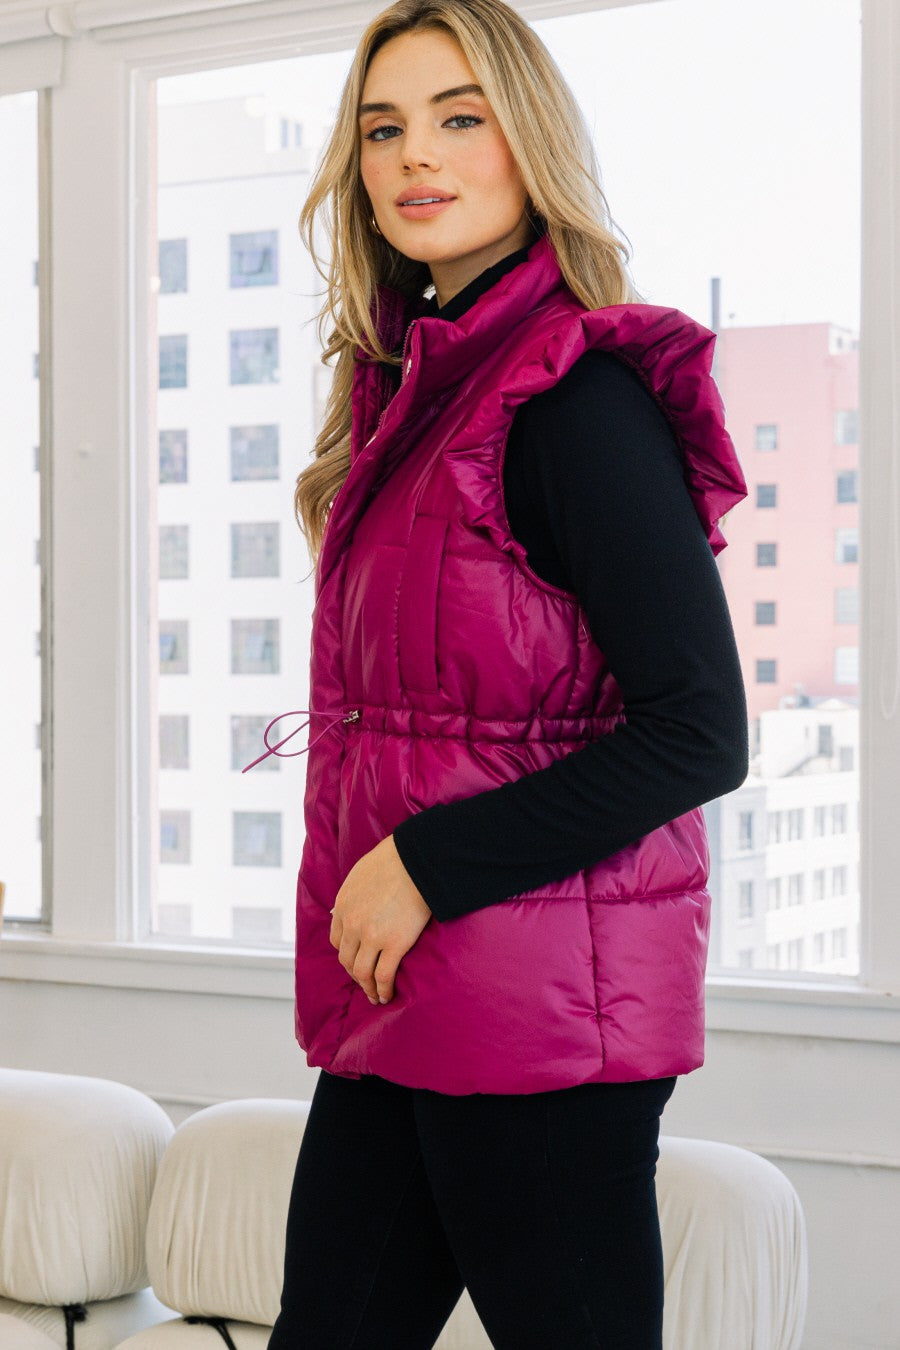 Pep in Your Step Puffer Vest - Magenta